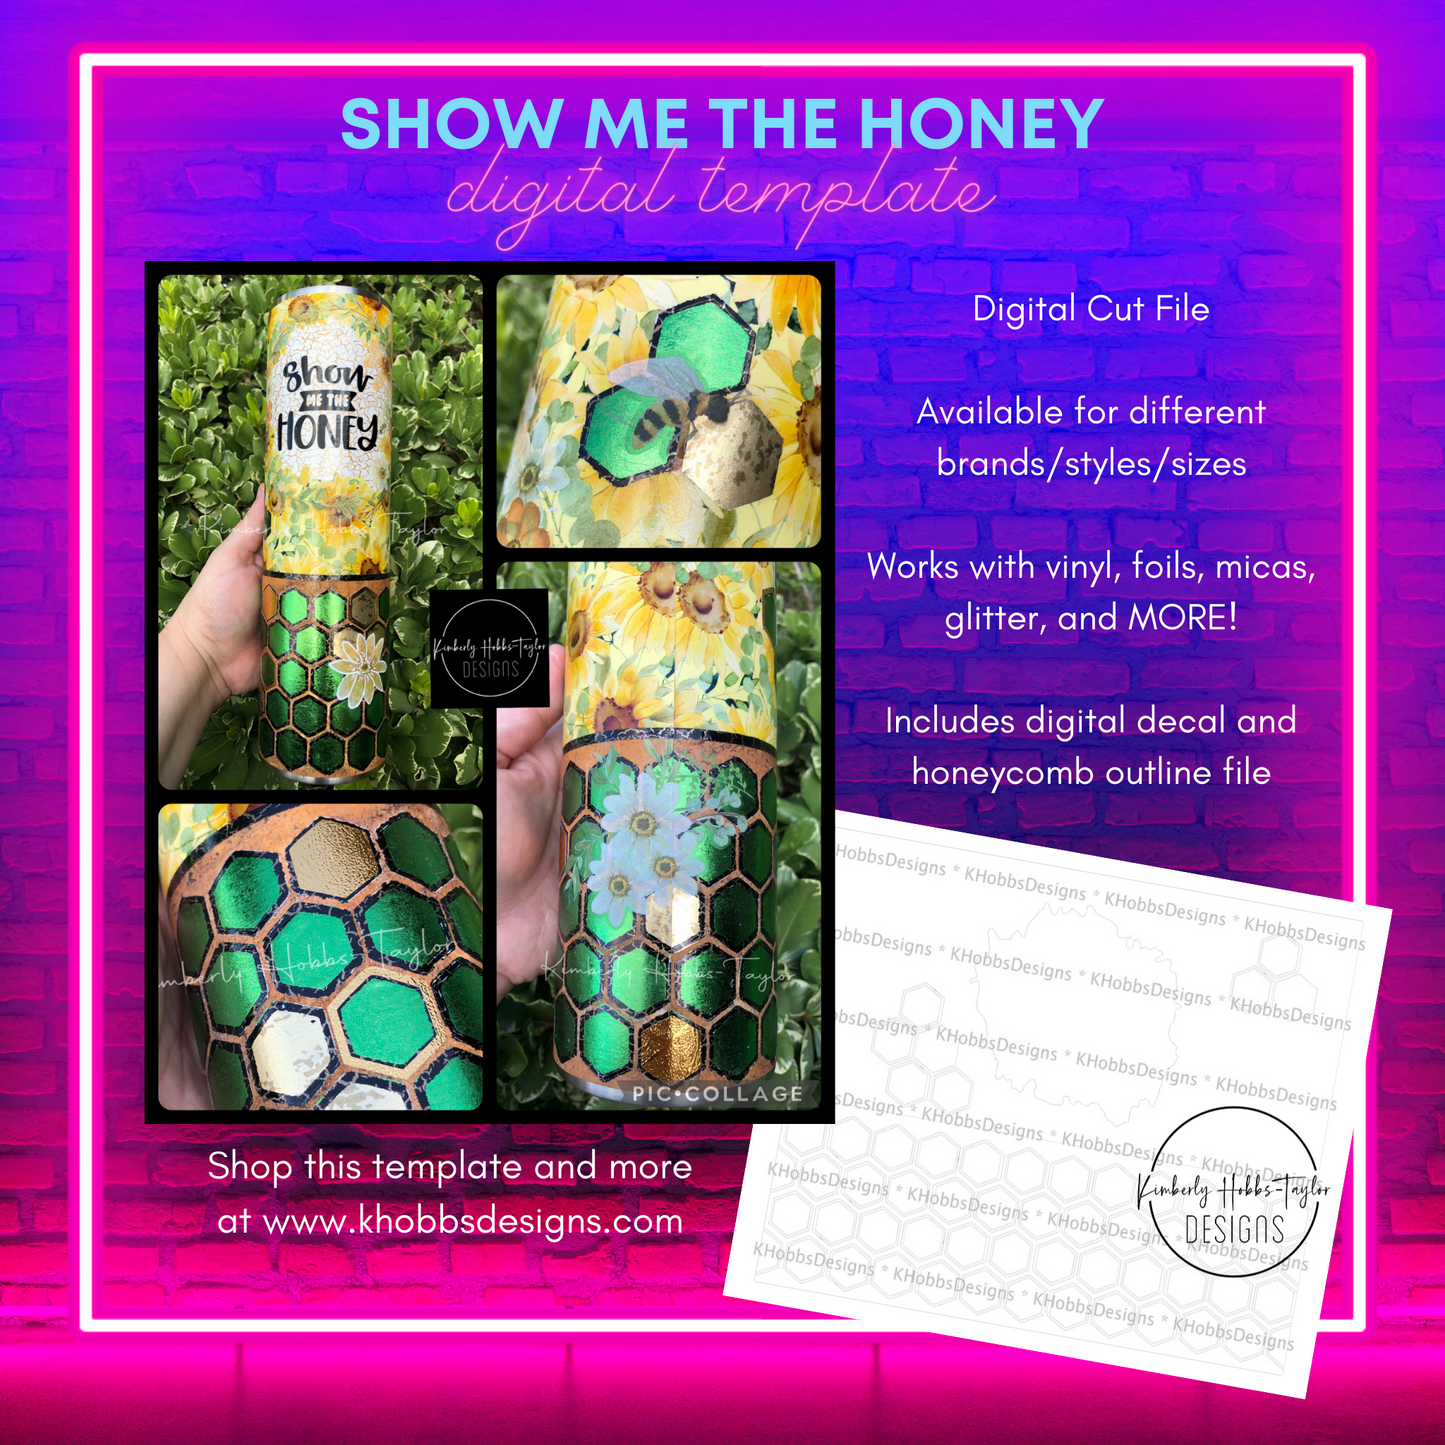 Show Me The Honey Template for TSM_Tipsy 24 Plump - Digital Cut File Only